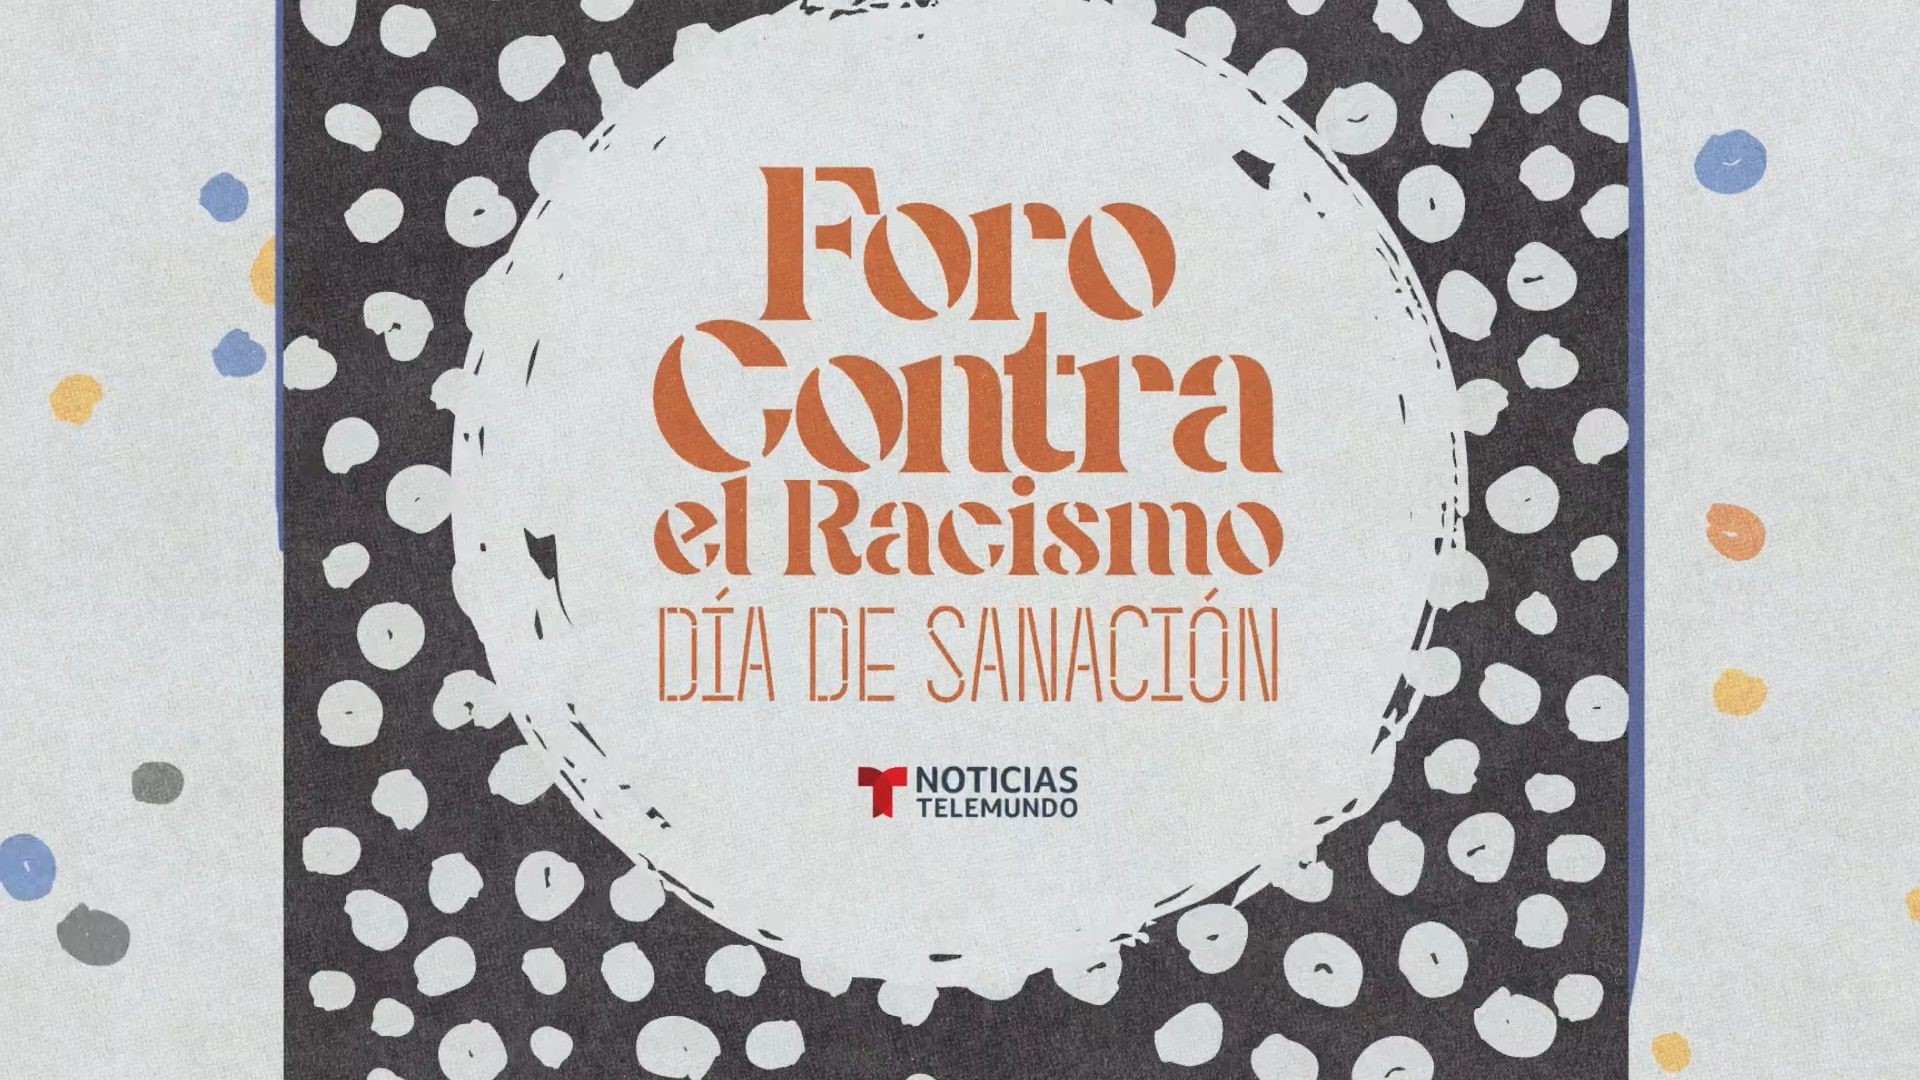 Noticias Telemundo’s Johana Suárez and Lori Montenegro co-host conversations examining racial equity and the state of race in the U.S. and the Latino community.